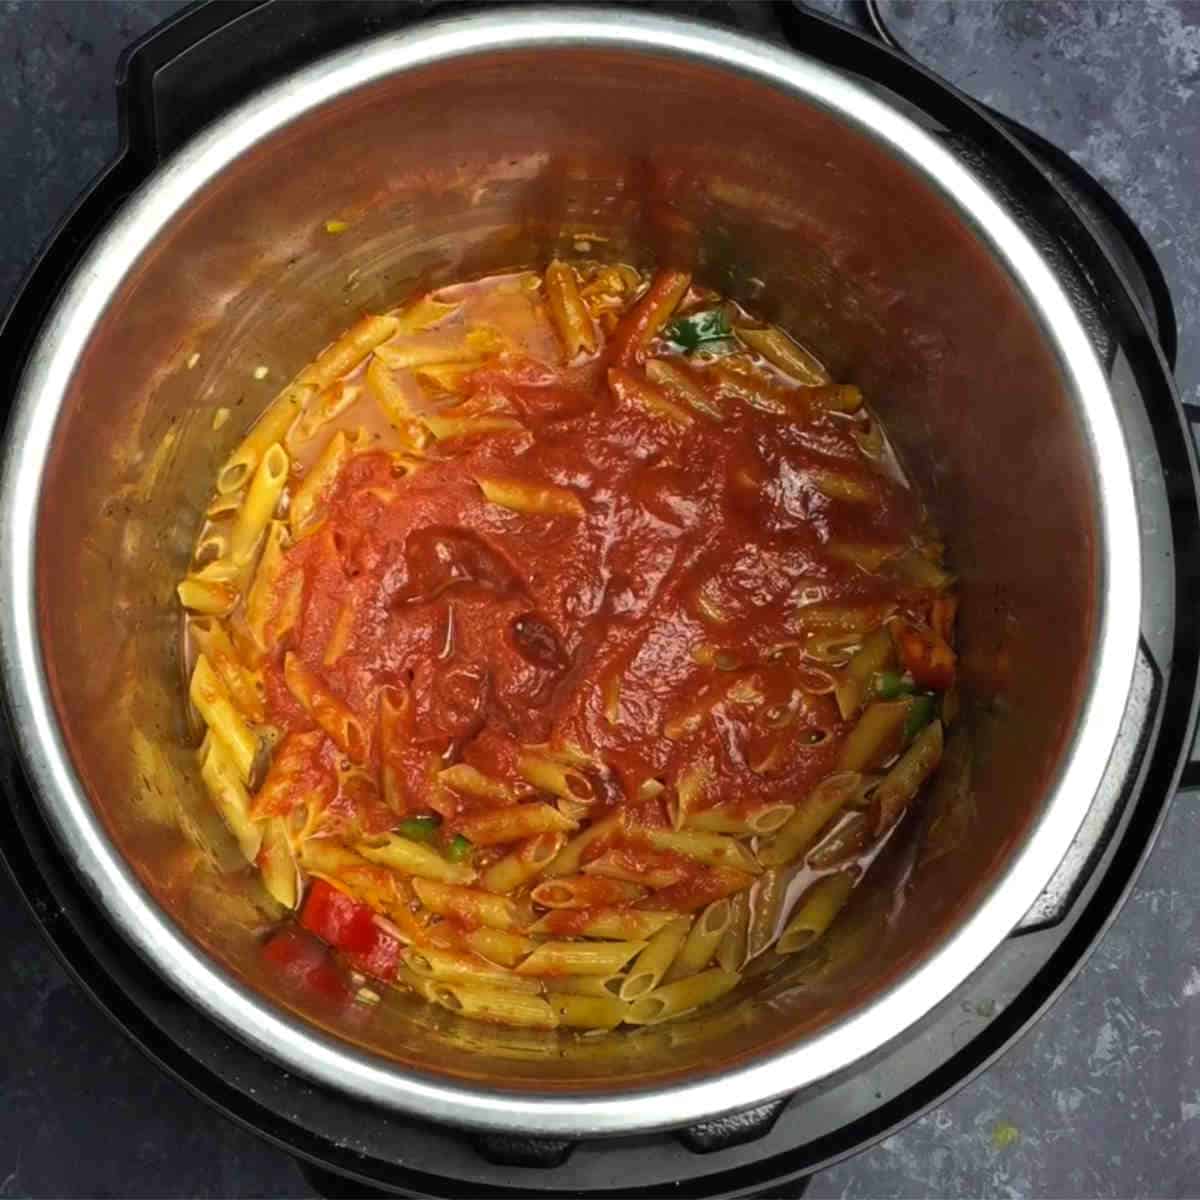 Spread the tomato puree all over the pasta. Do not stir after adding the pasta. Push the dry pasta slightly so that it is covered in liquid